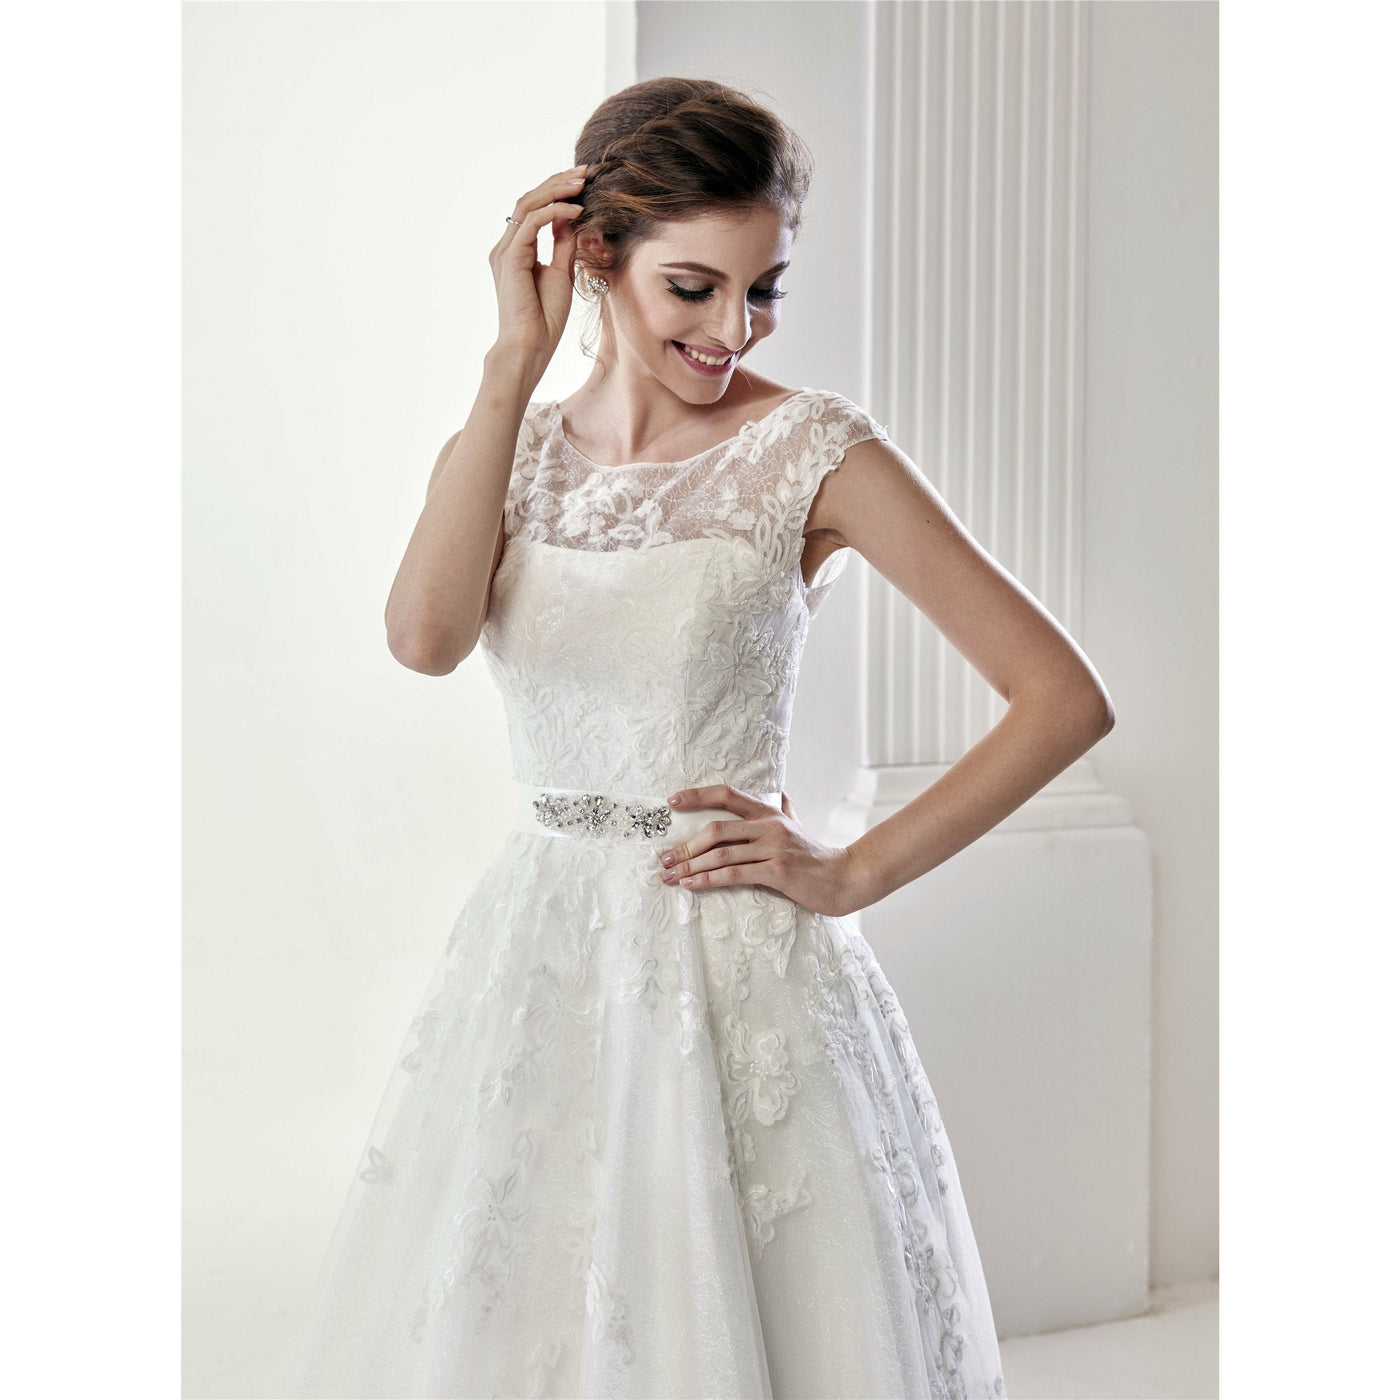 Chicely Illusion neckline Chantilly ly lace A-Line wedding dress1